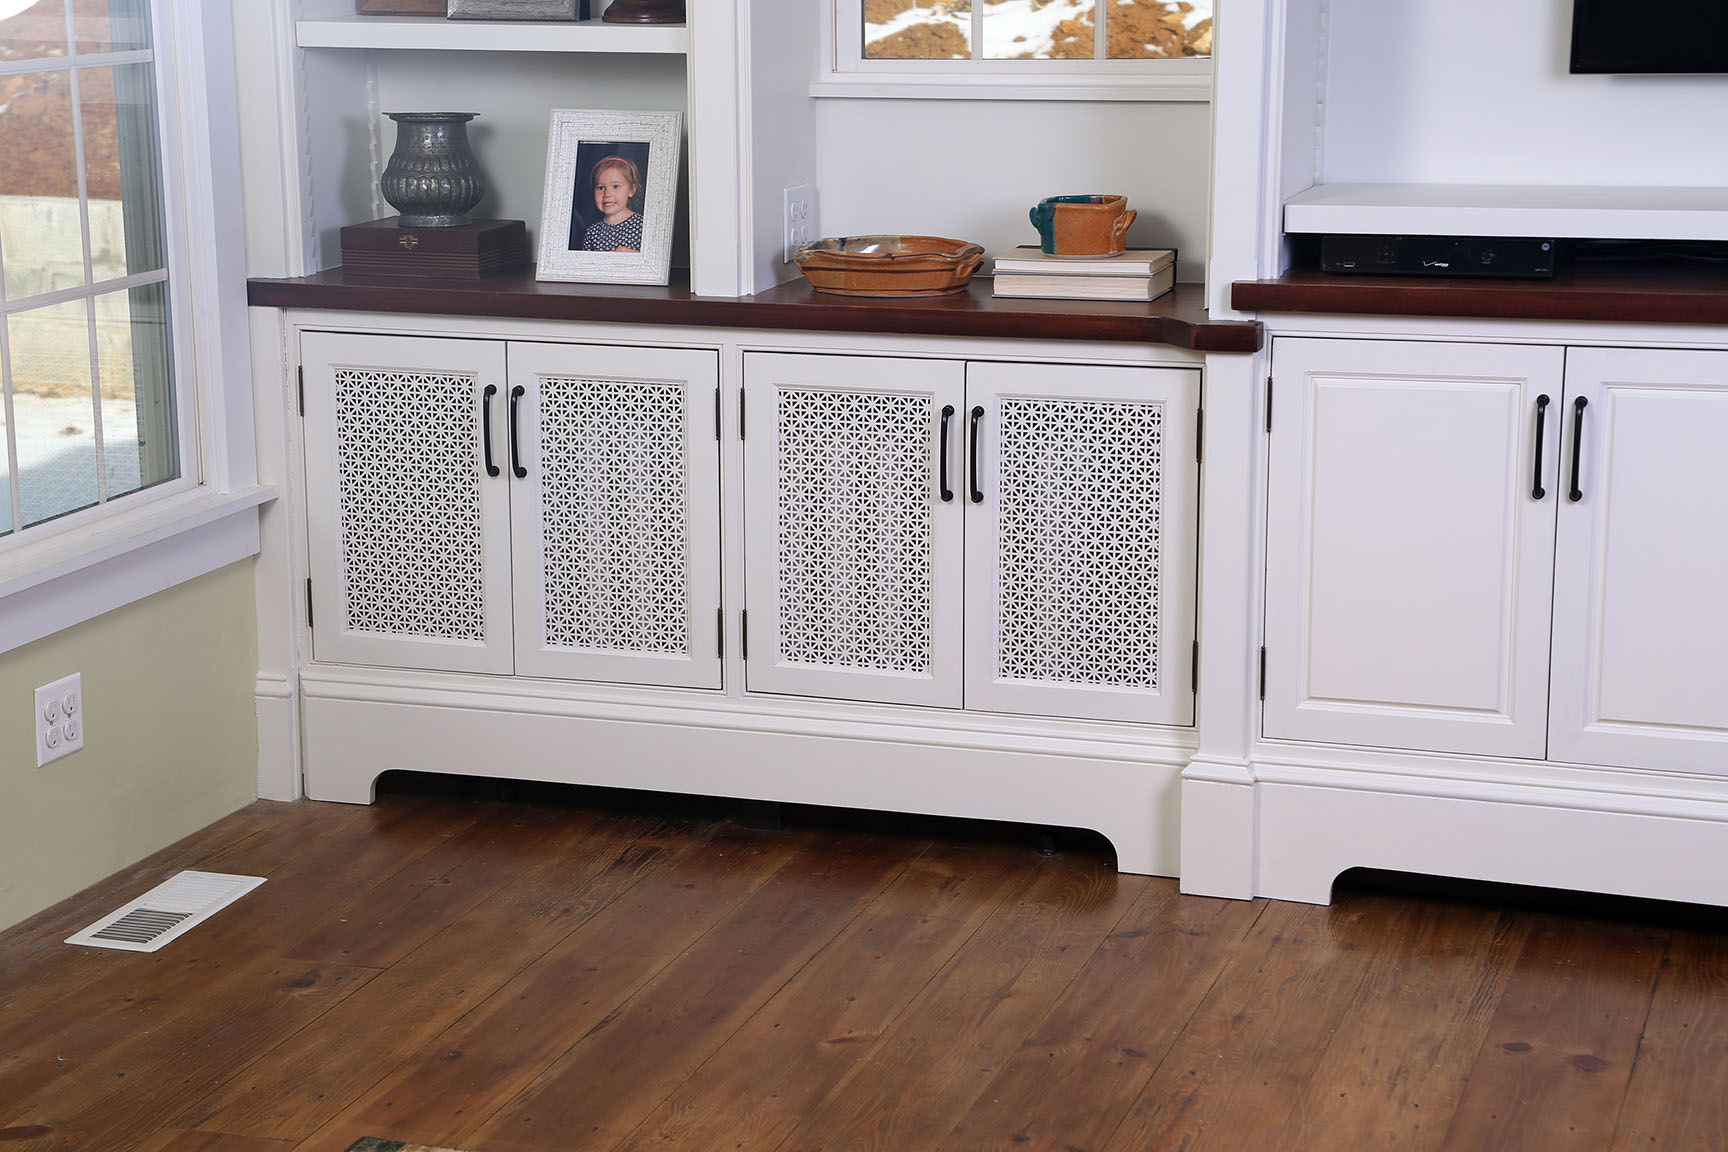  The left-side doors conceal an existing radiator behind a false cabinet front that swings open to provide access when needed. The arched baseboard lets air in to the radiator, and the open mesh doors allow heat to flow out to the room. 